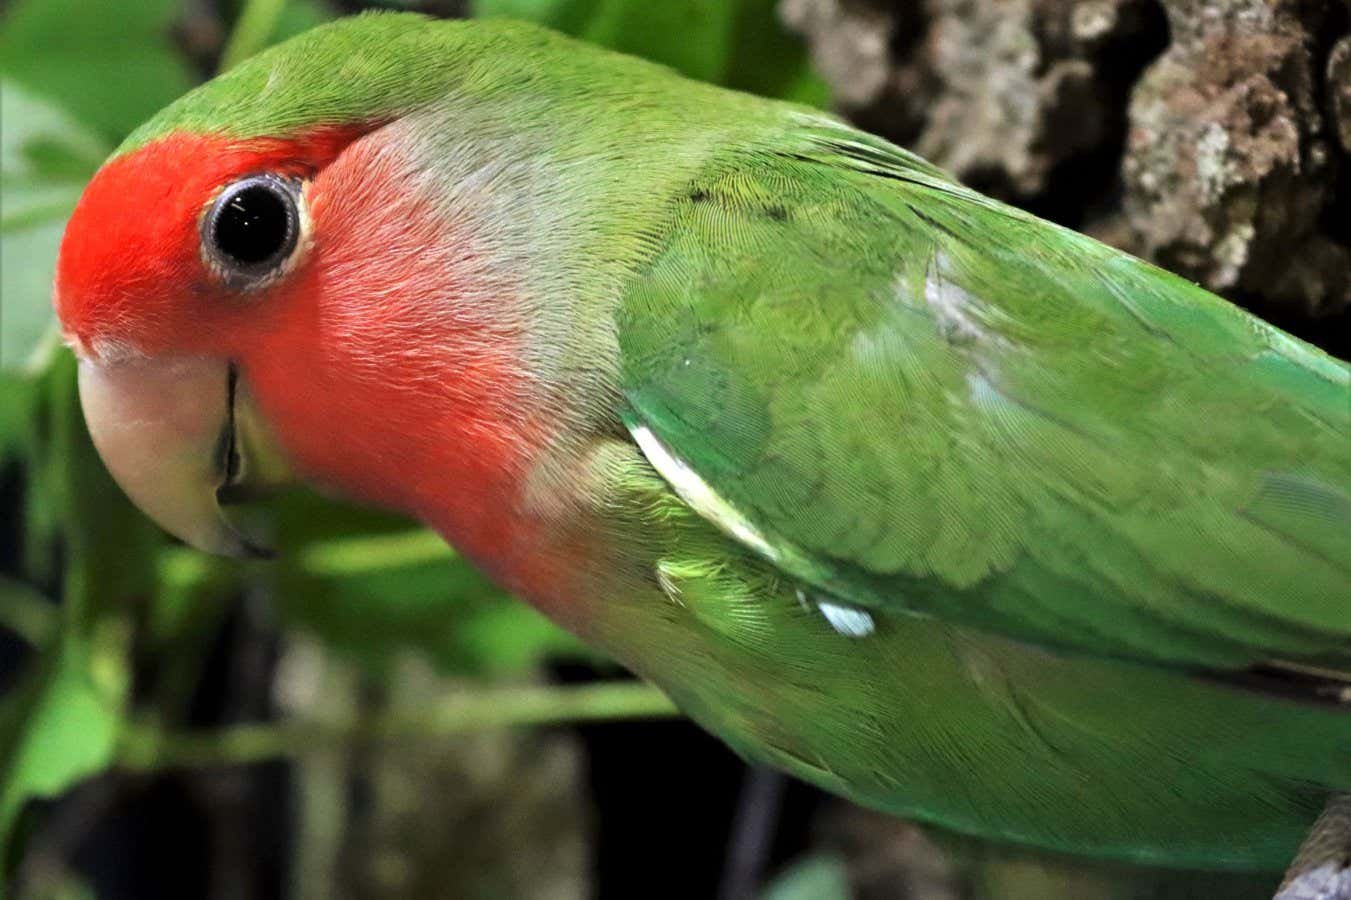 Watch parrots use their beaks for a newly identified form of motion